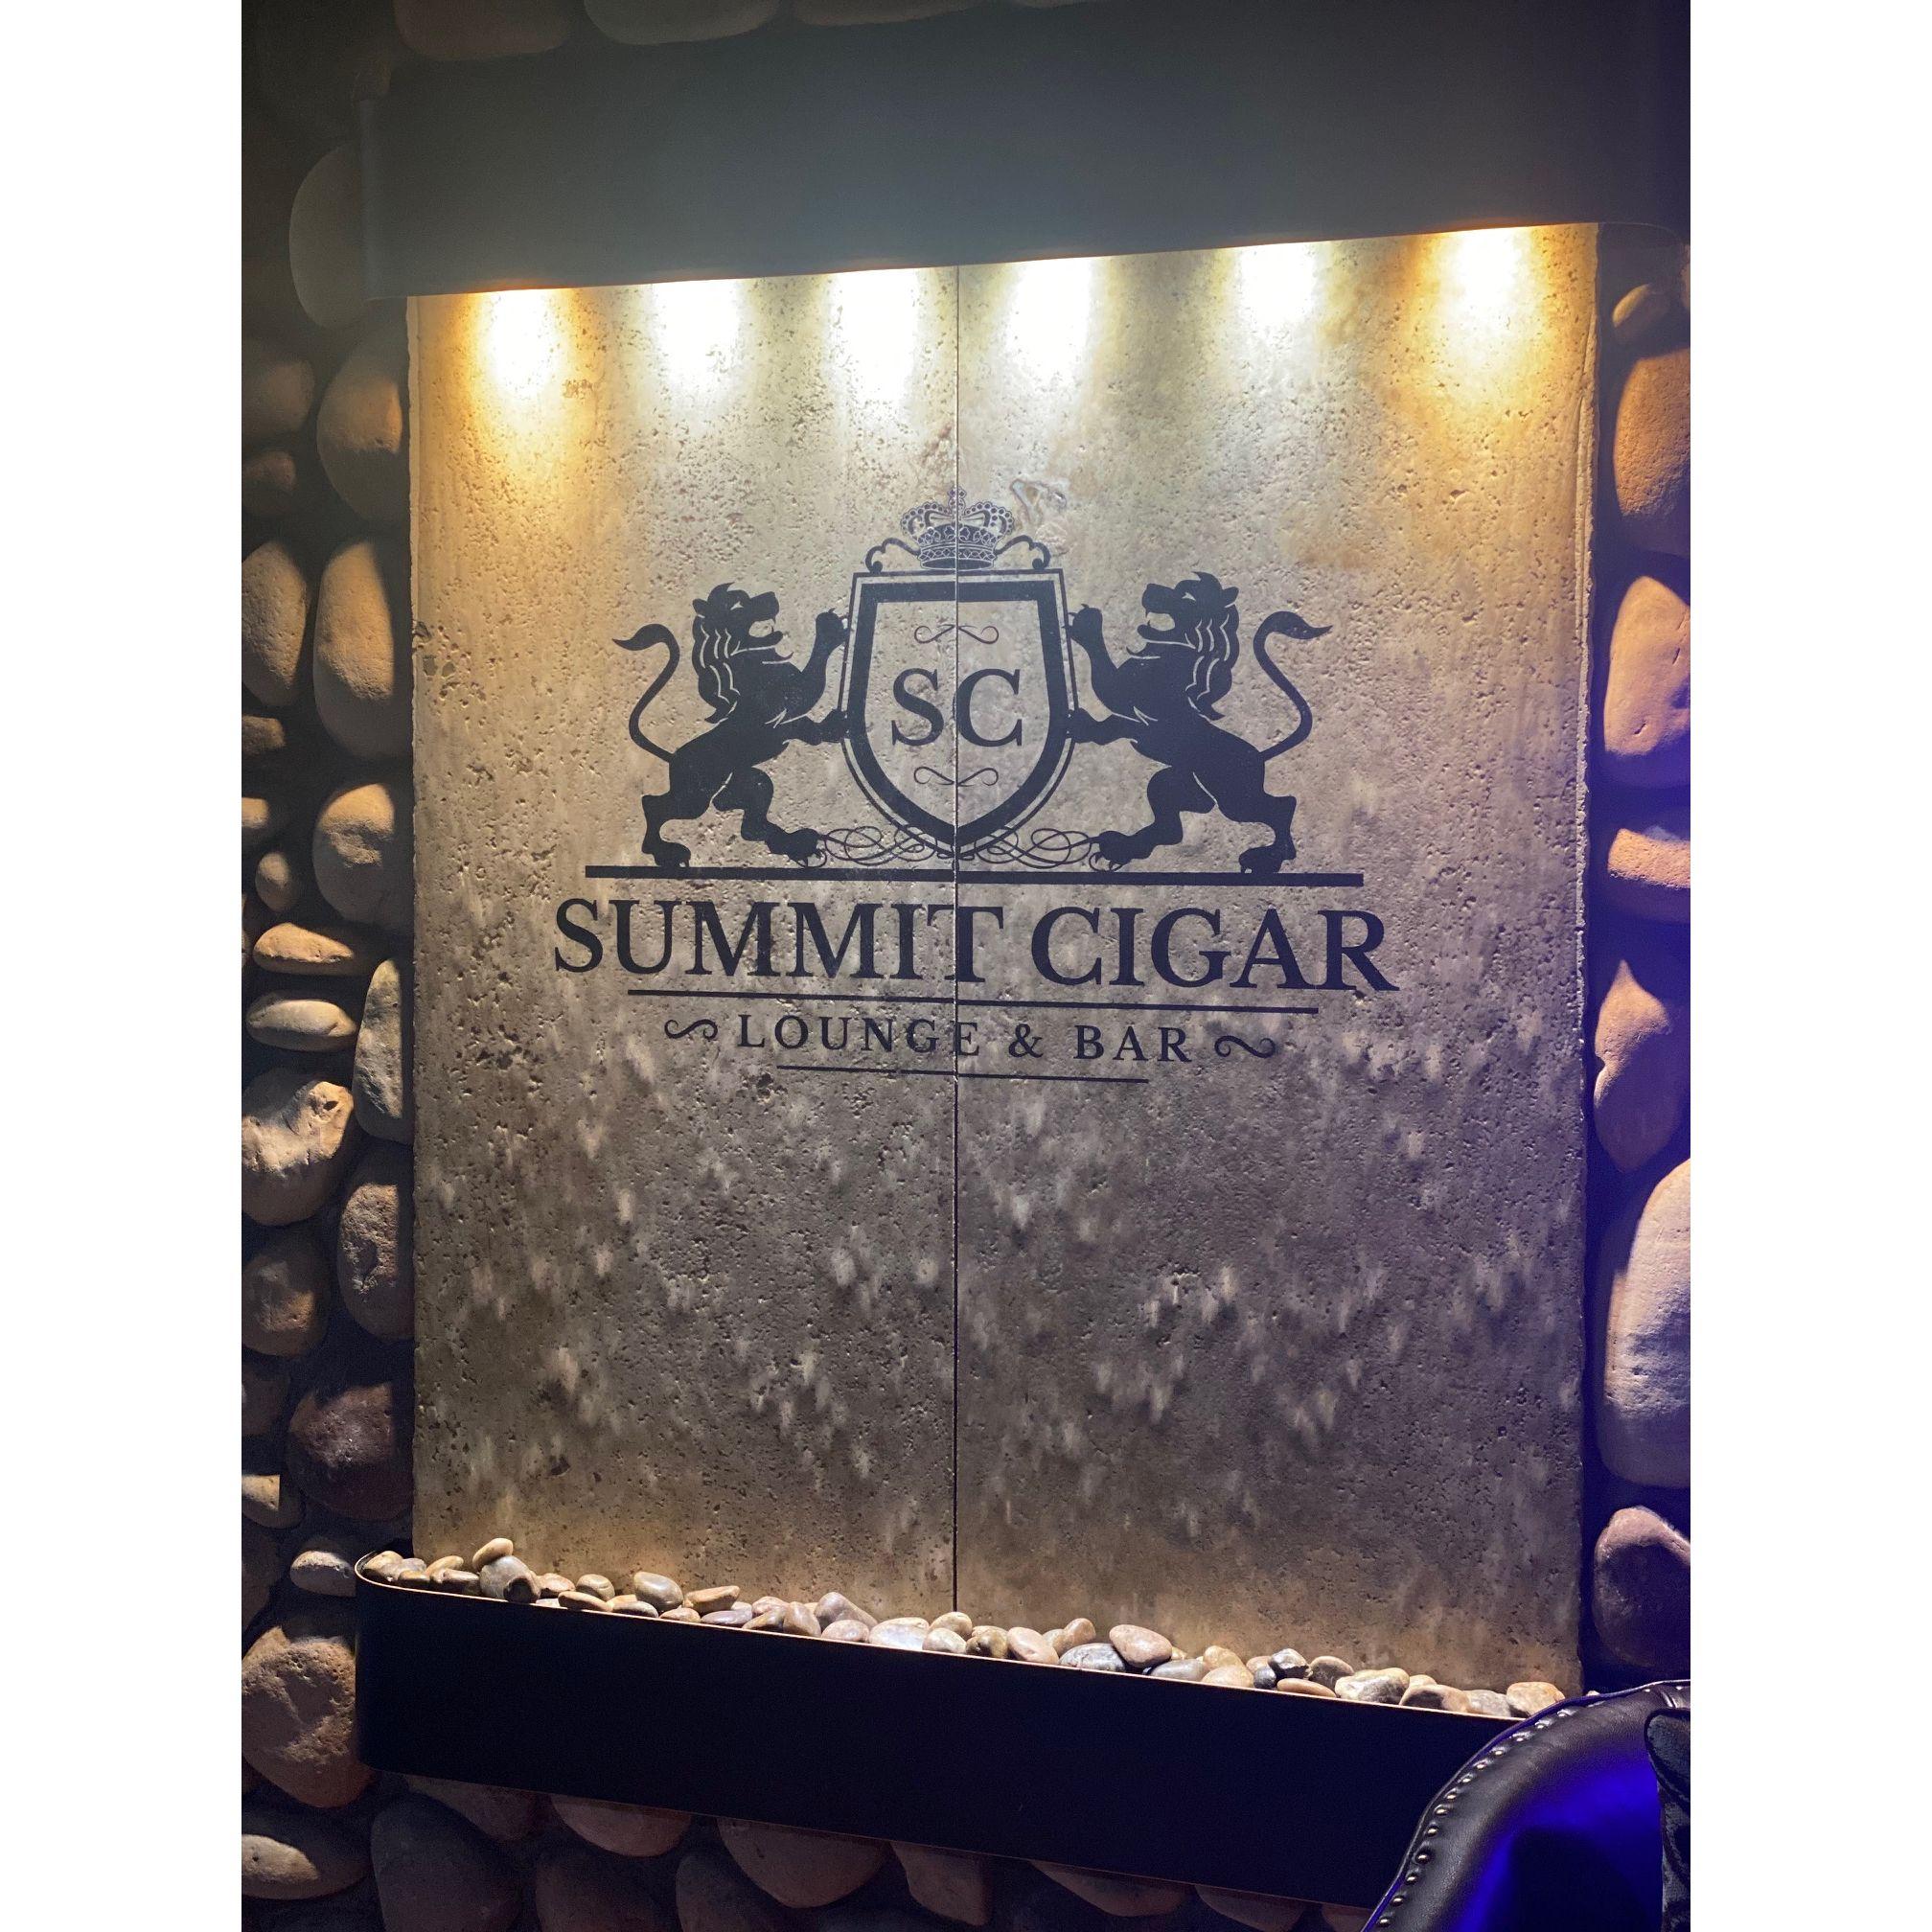 Second cigar lounge, our first was Owl Shop in New Haven, CT